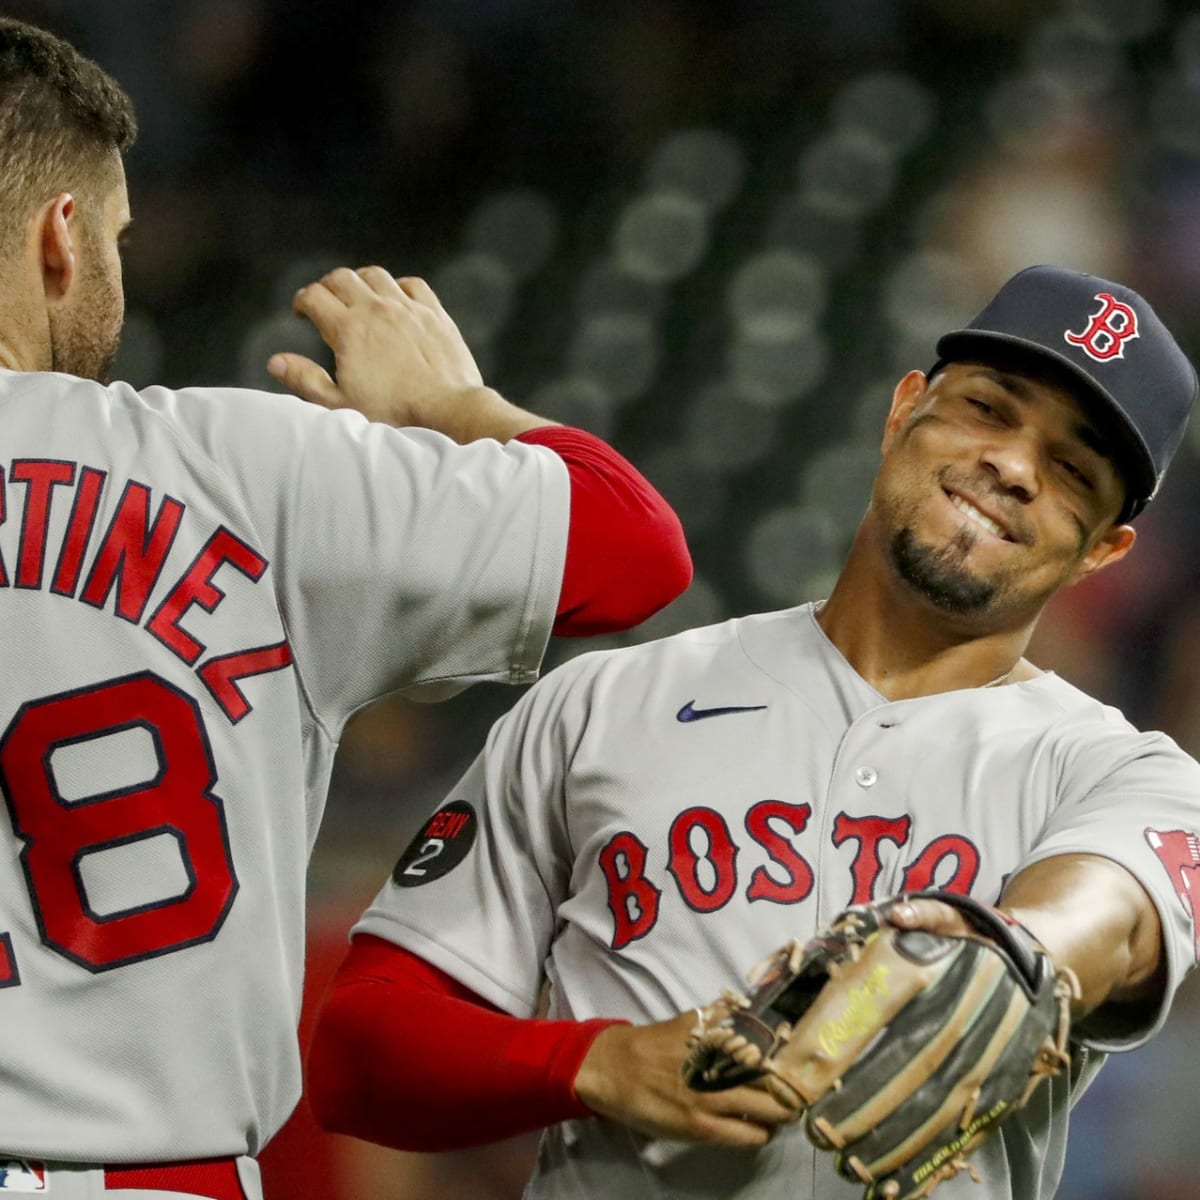 A Star Among Superstars: What Makes Bogaerts the “X” Factor for the Padres